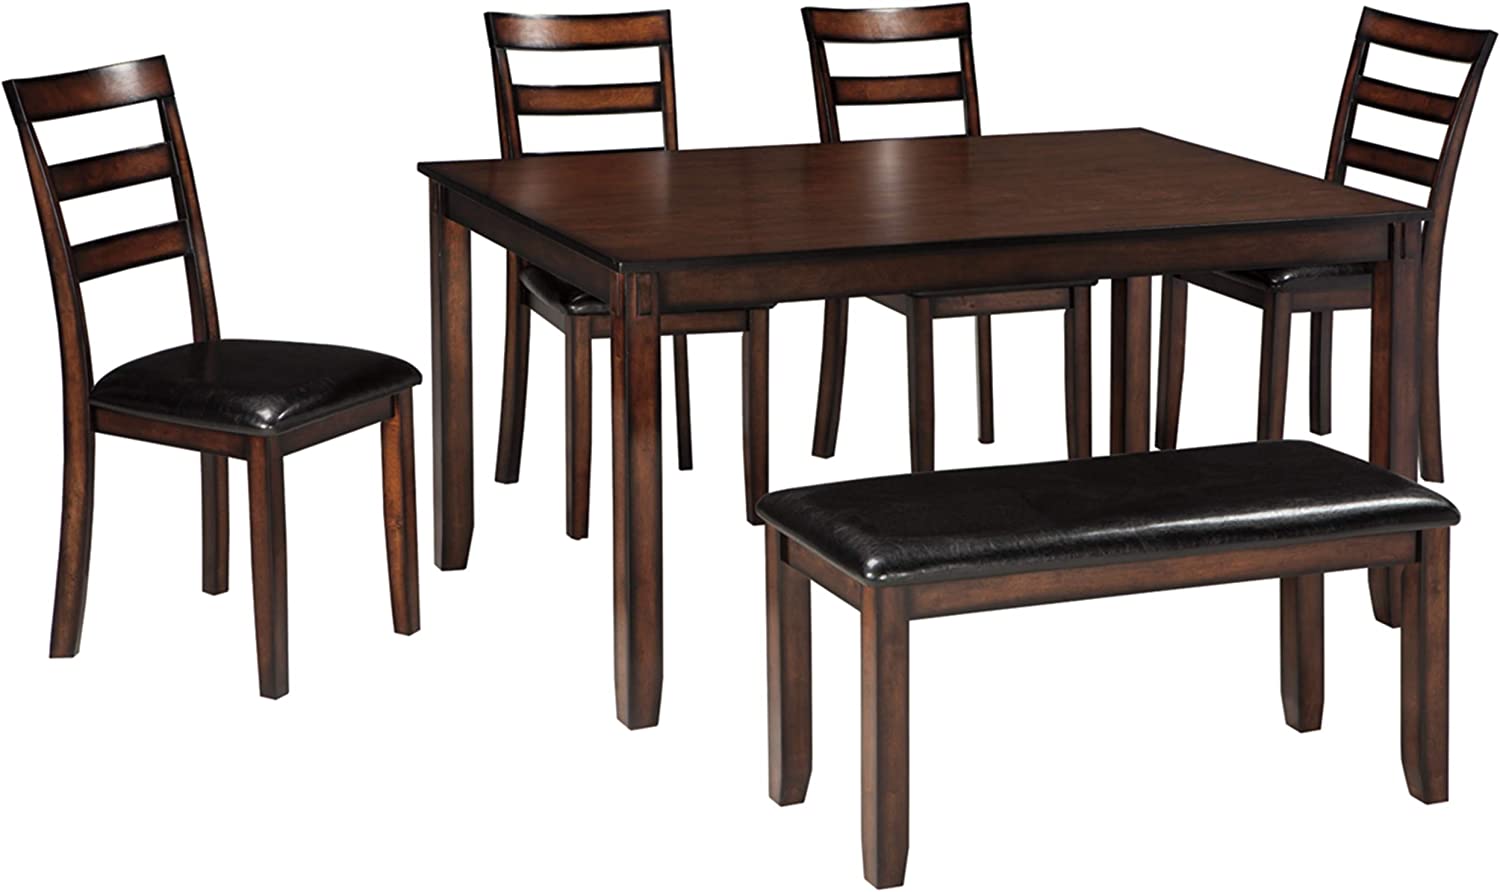 Signature Design by Ashley Coviar 6 Piece Dining Set, Includes Table, 4 Chairs & Bench, Dark Brown - $343.88